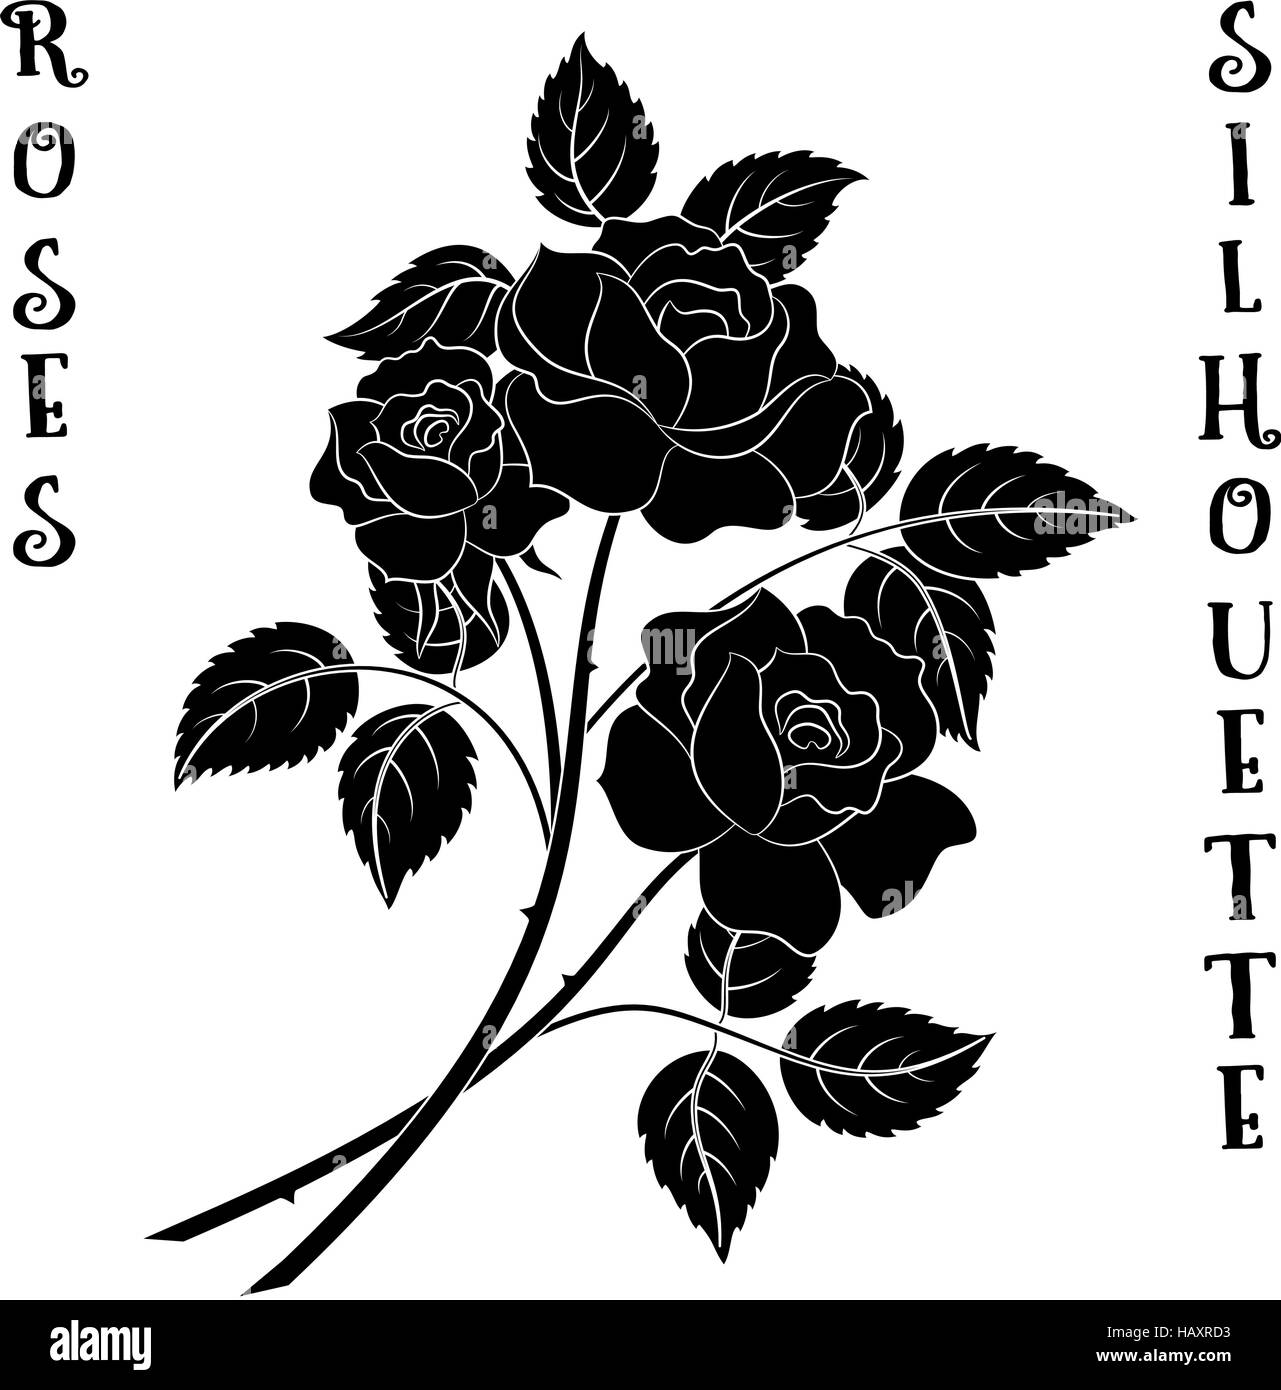 Flowers Bouquet, Roses Silhouette Stock Vector